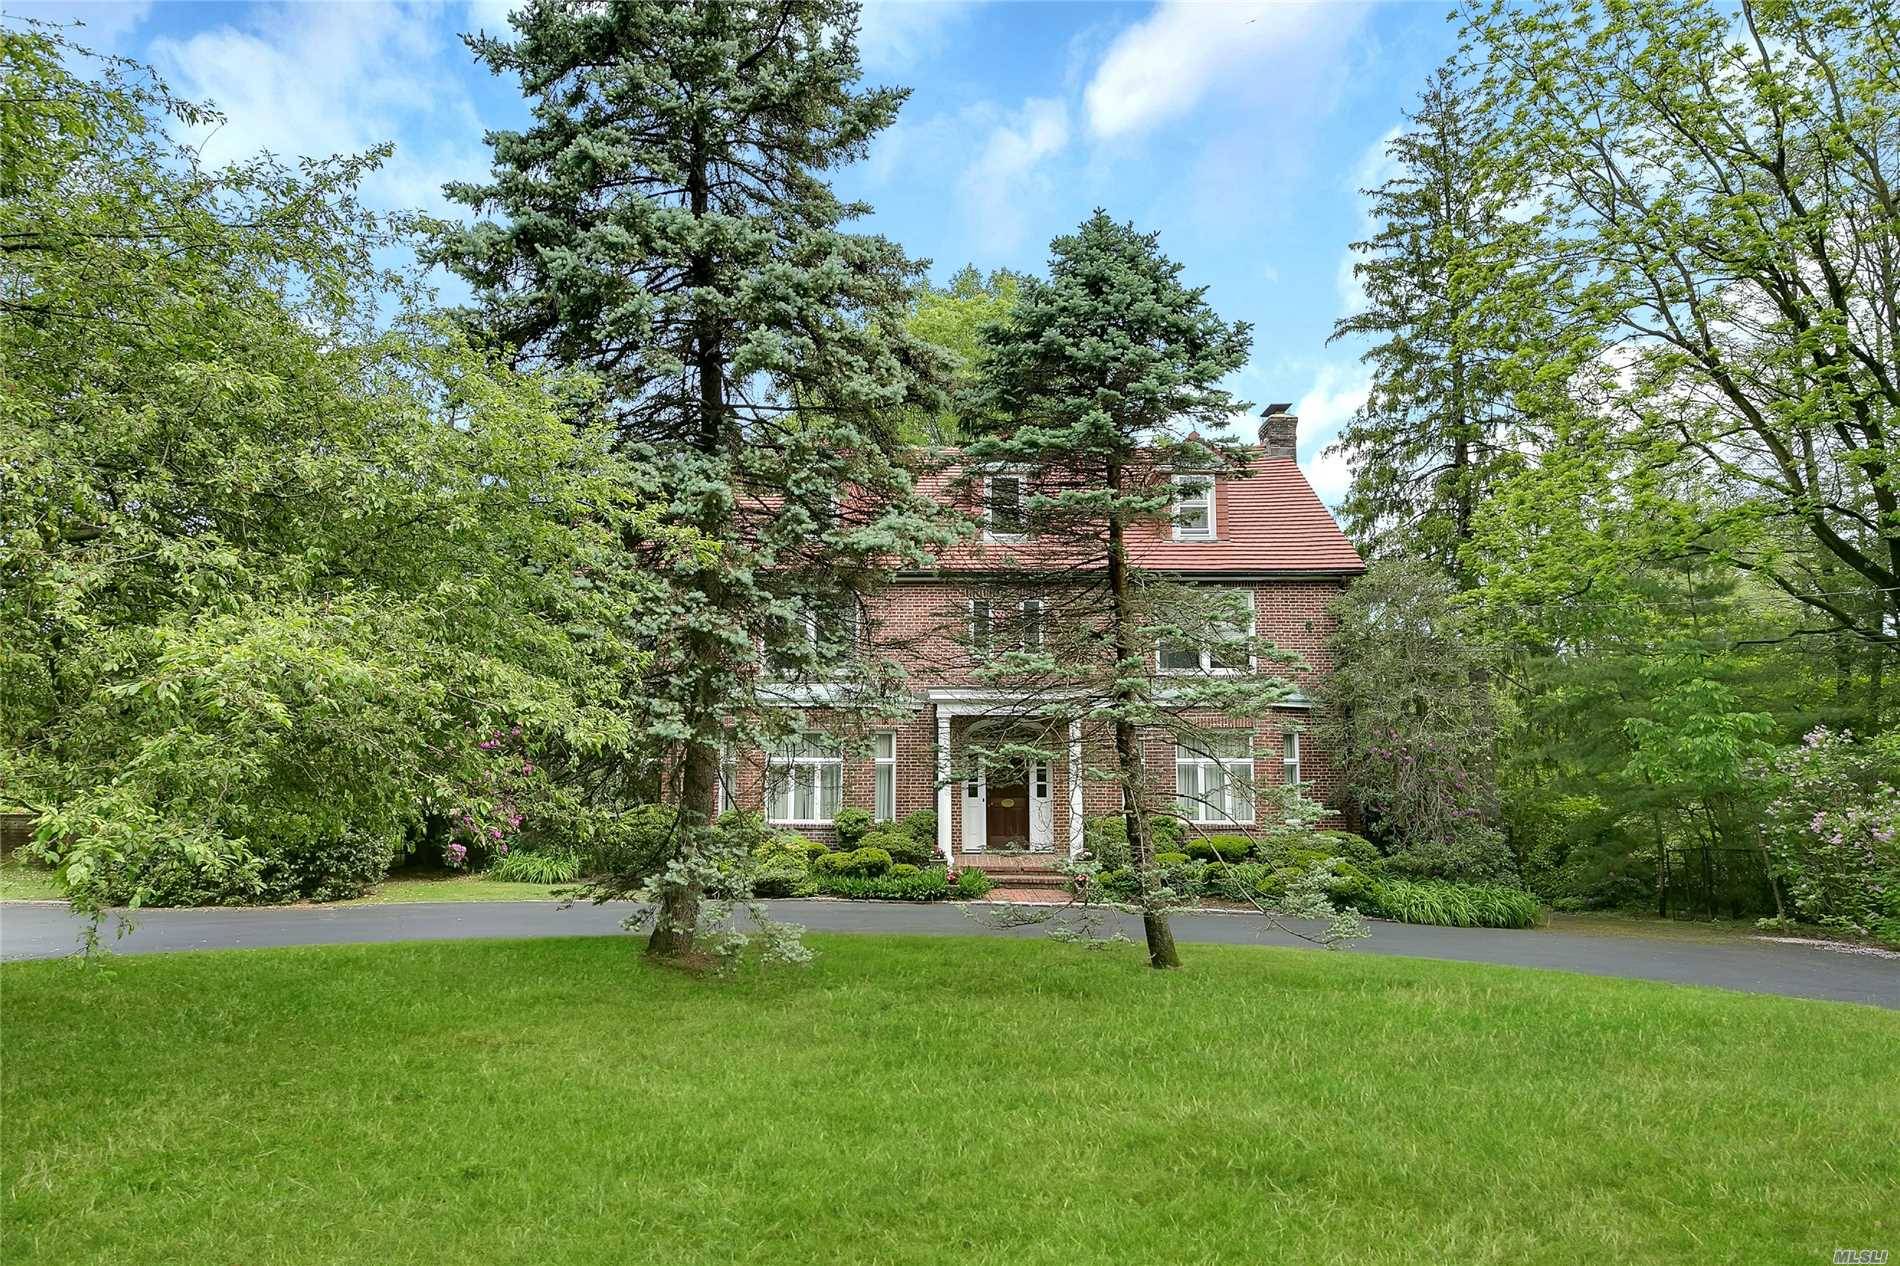 Lattingtown. Stately Brick Country Manor Set On Over 2 Private And Wondrous Acres In Lattingtown.